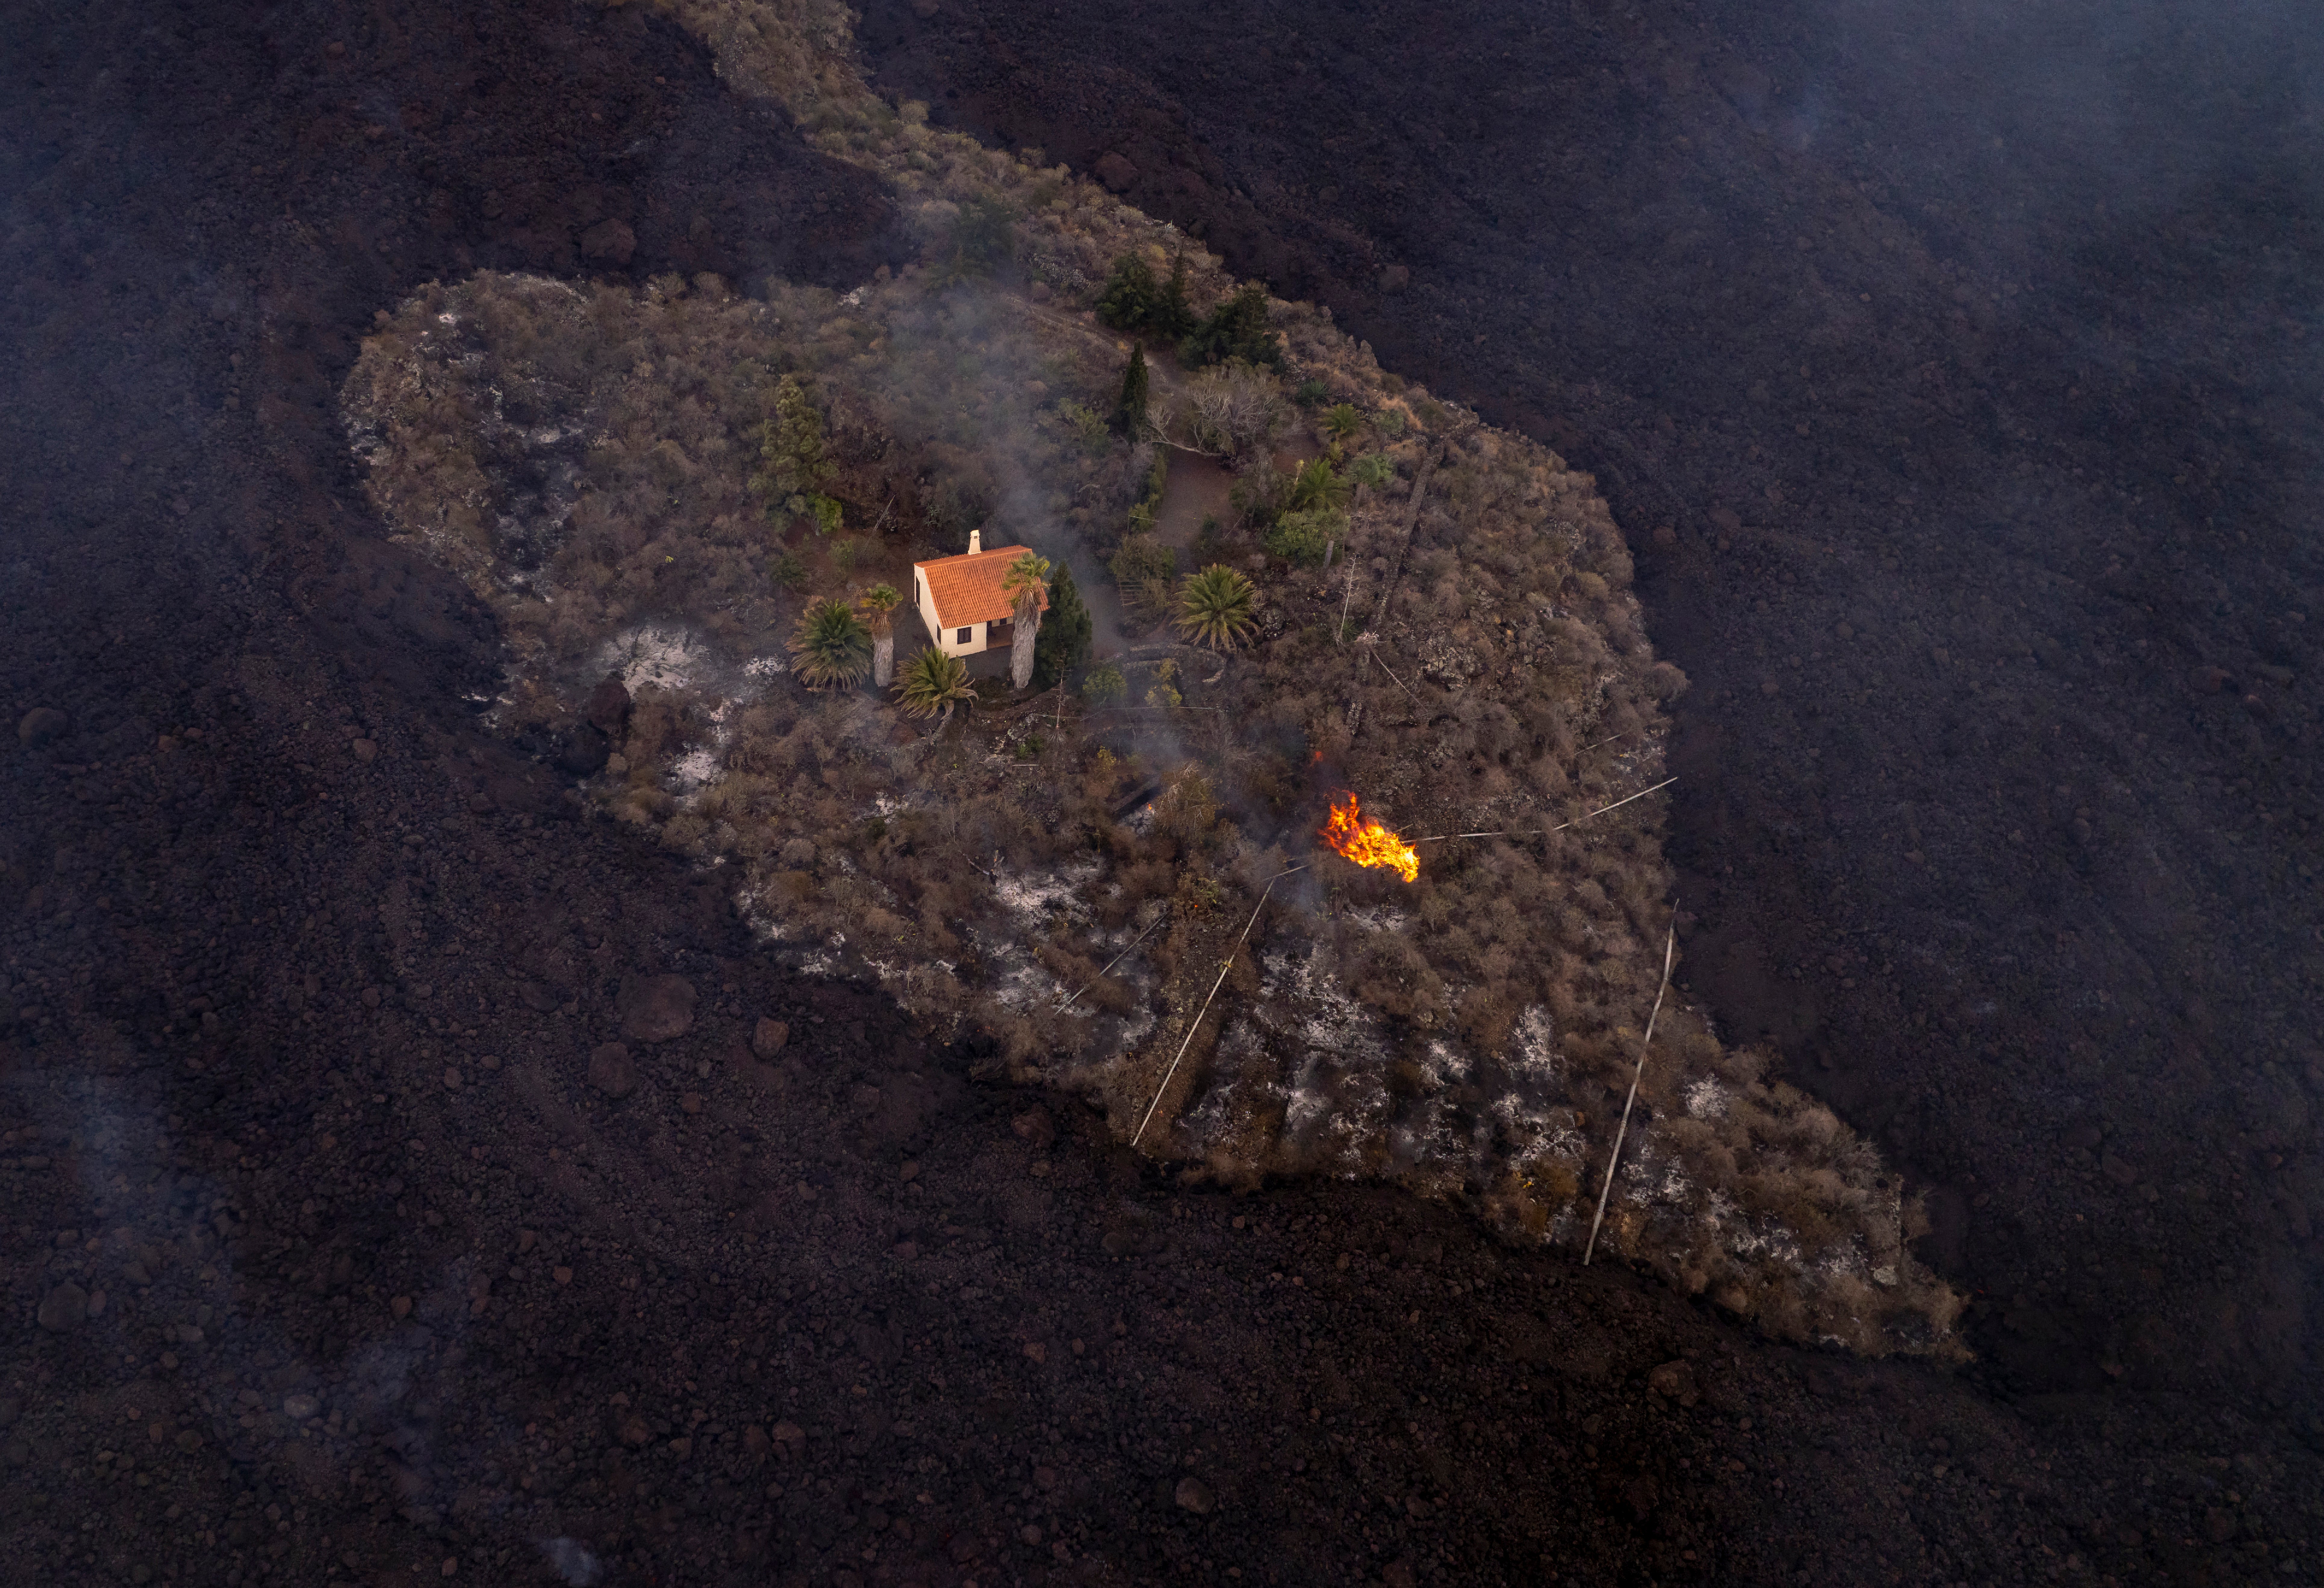 In this photo, provided by iLoveTheWorld, a house remains intact as lava flows around it following a volcanic eruption